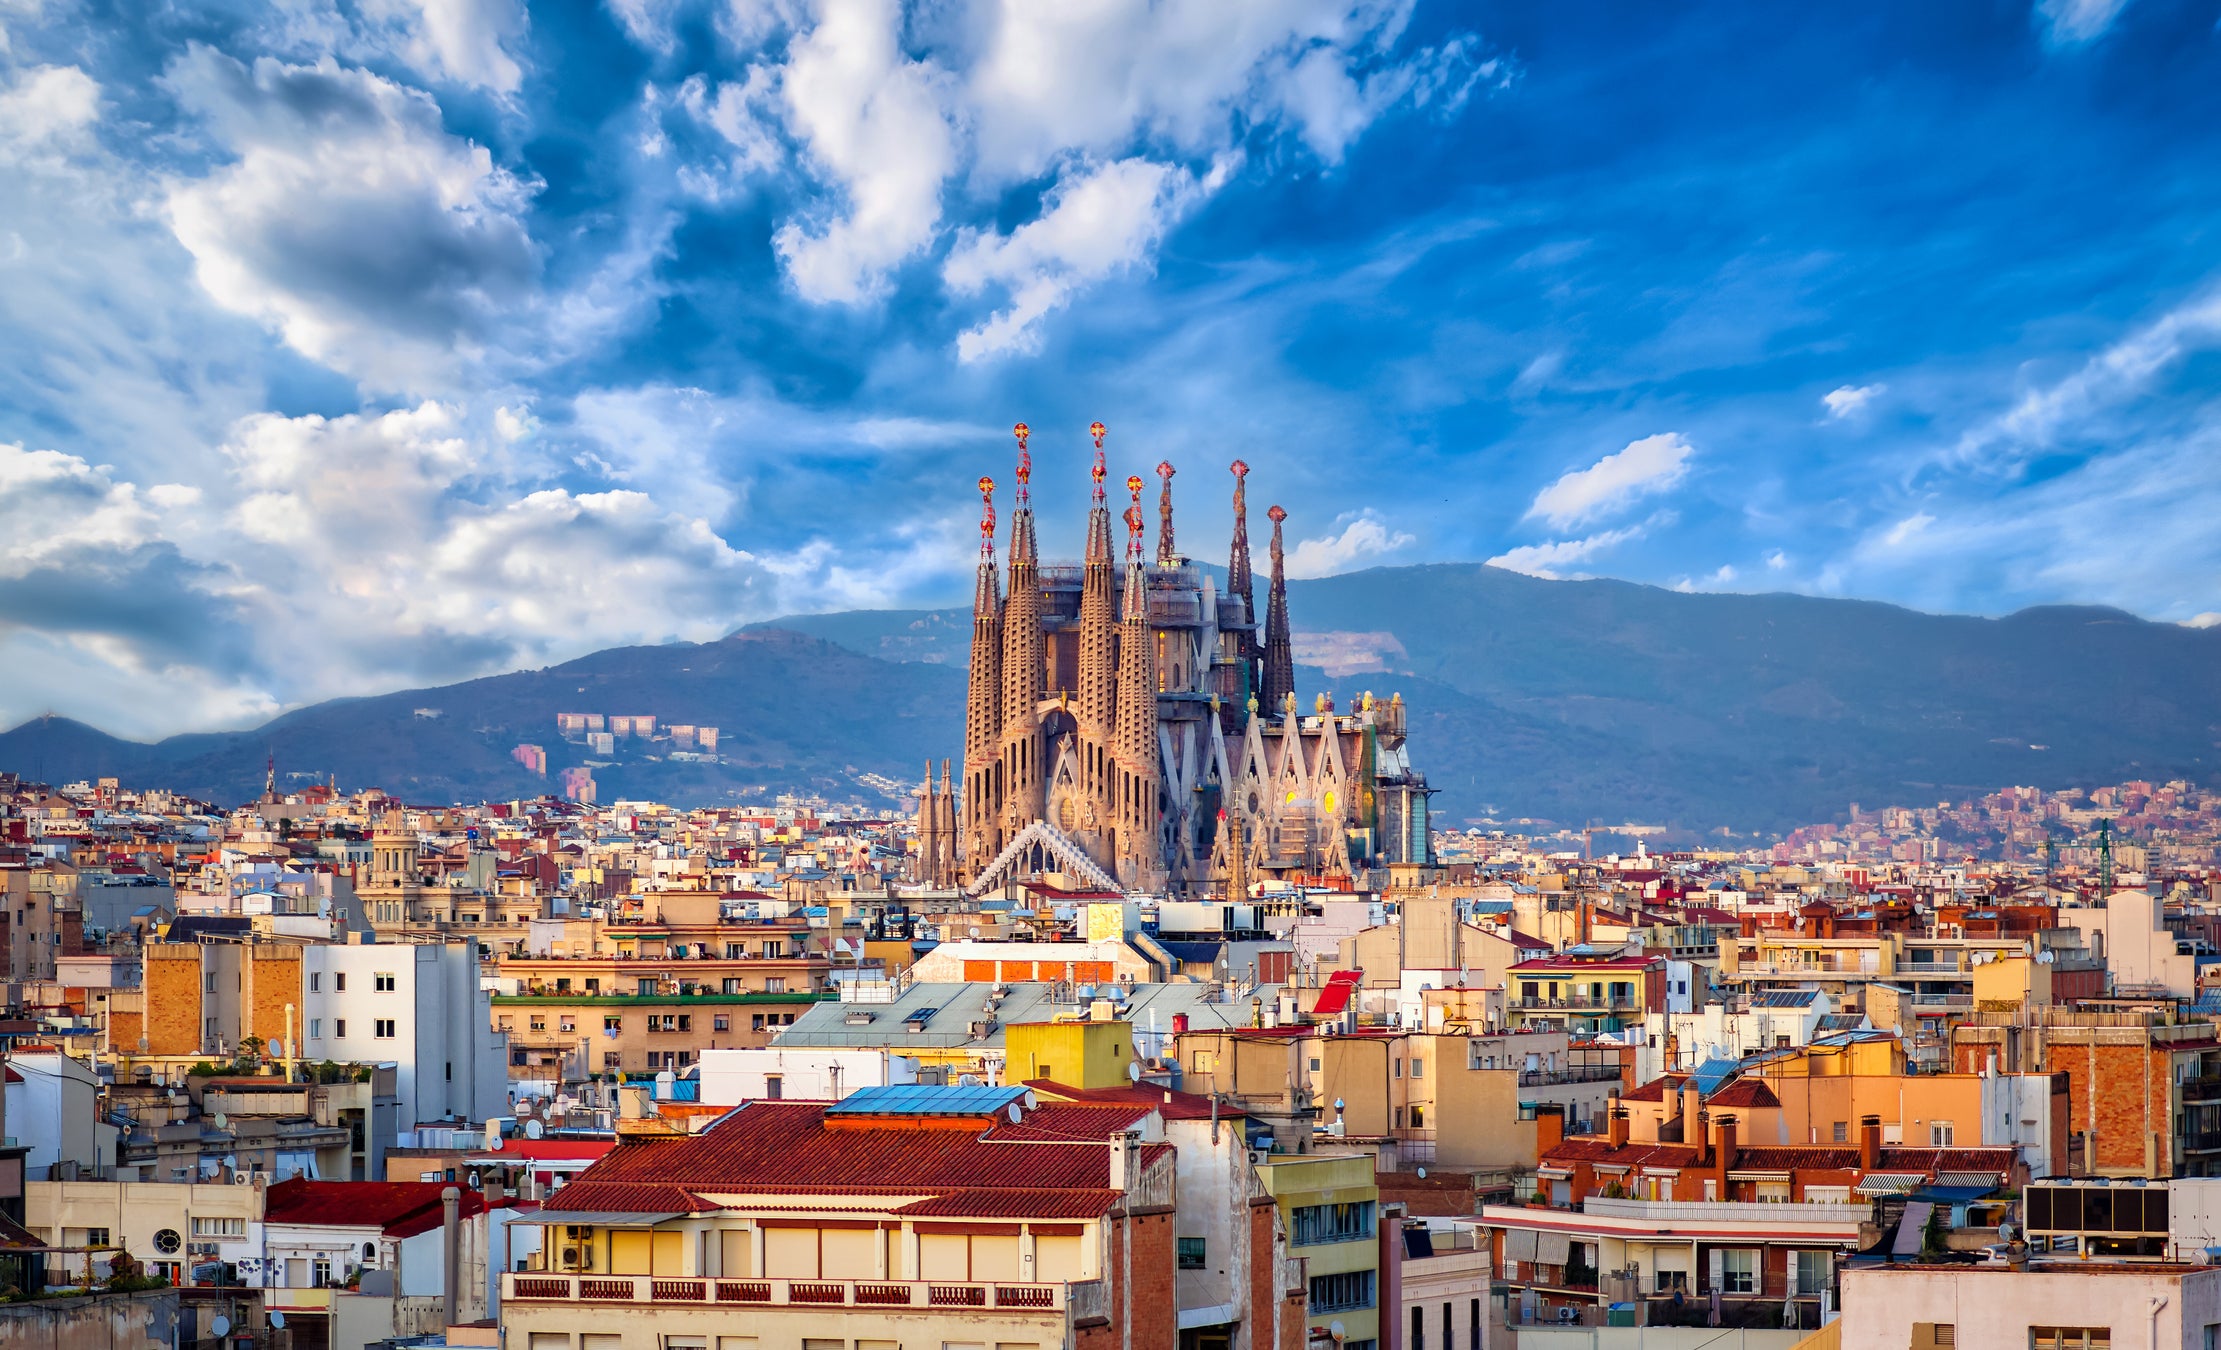 Barcelona is set to ban tourists from renting holiday apartments by 2028